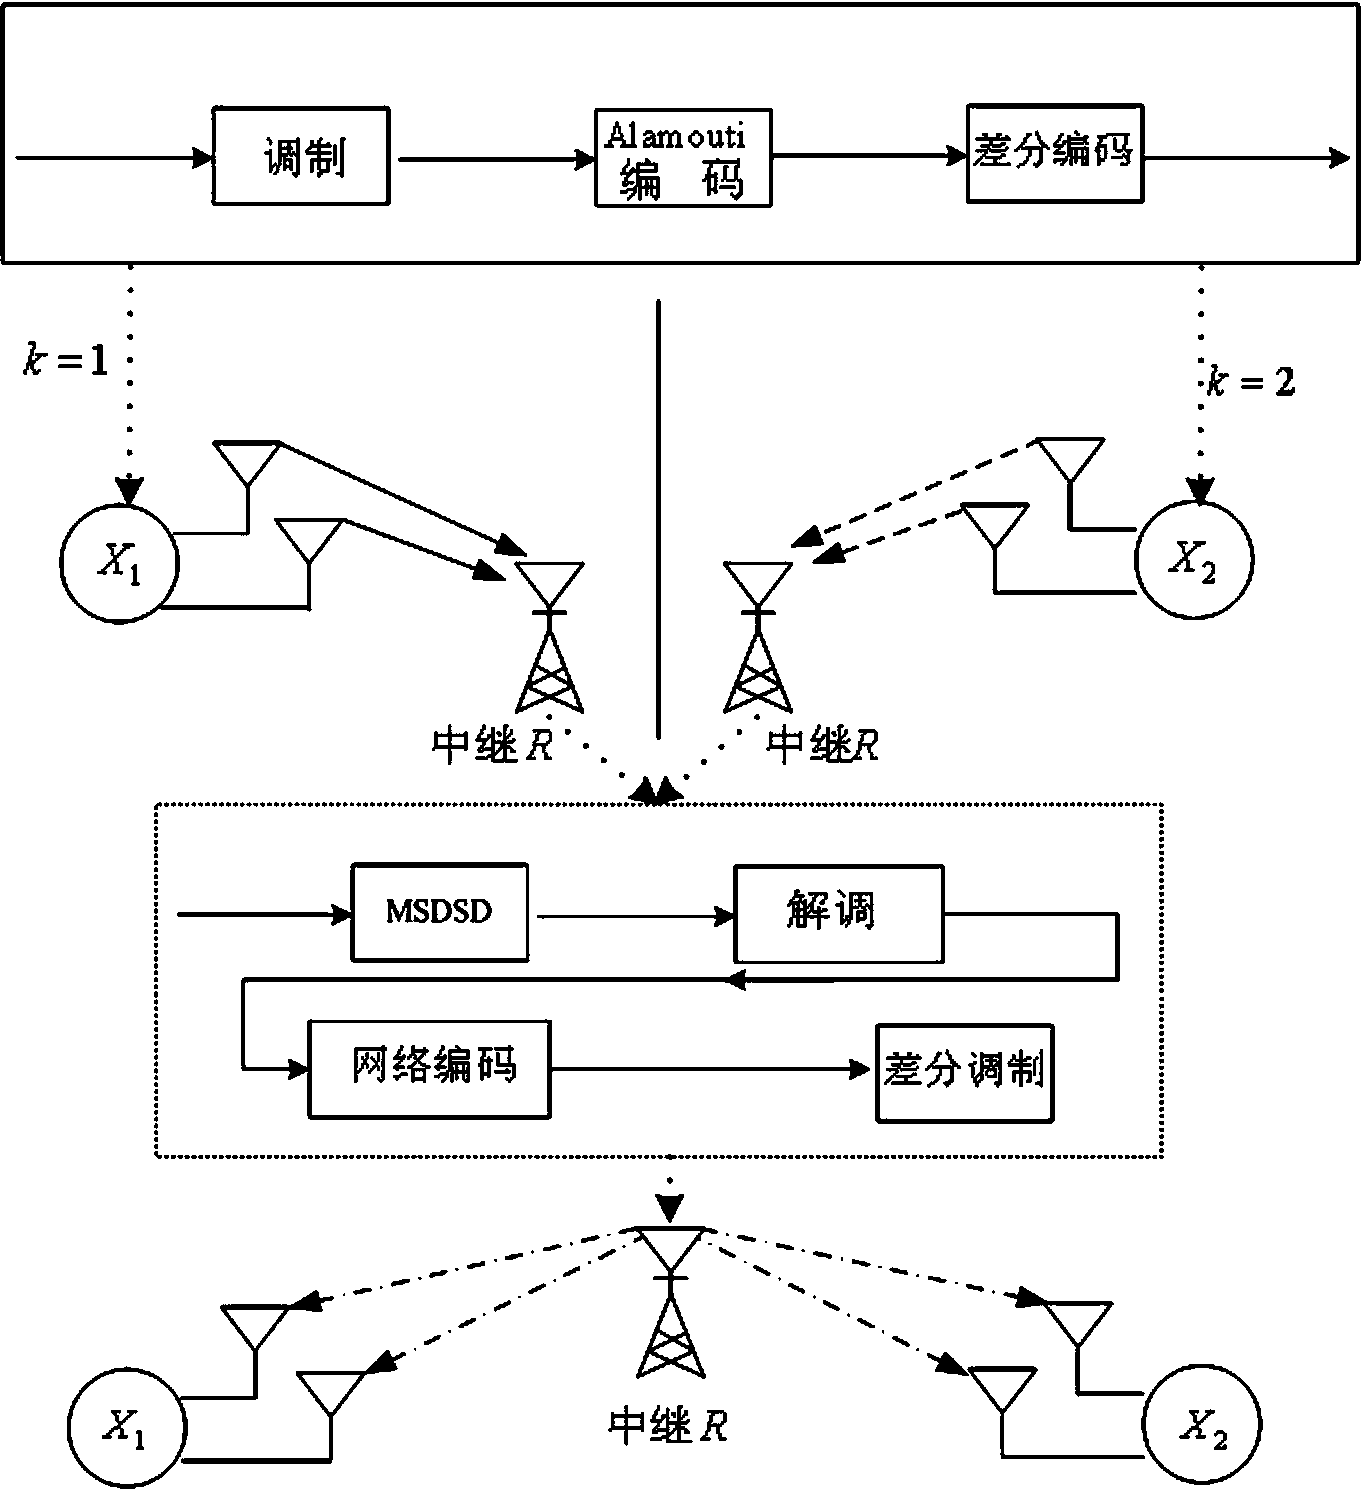 Orthogonality difference space-time network coding method of double-direction relay channel model